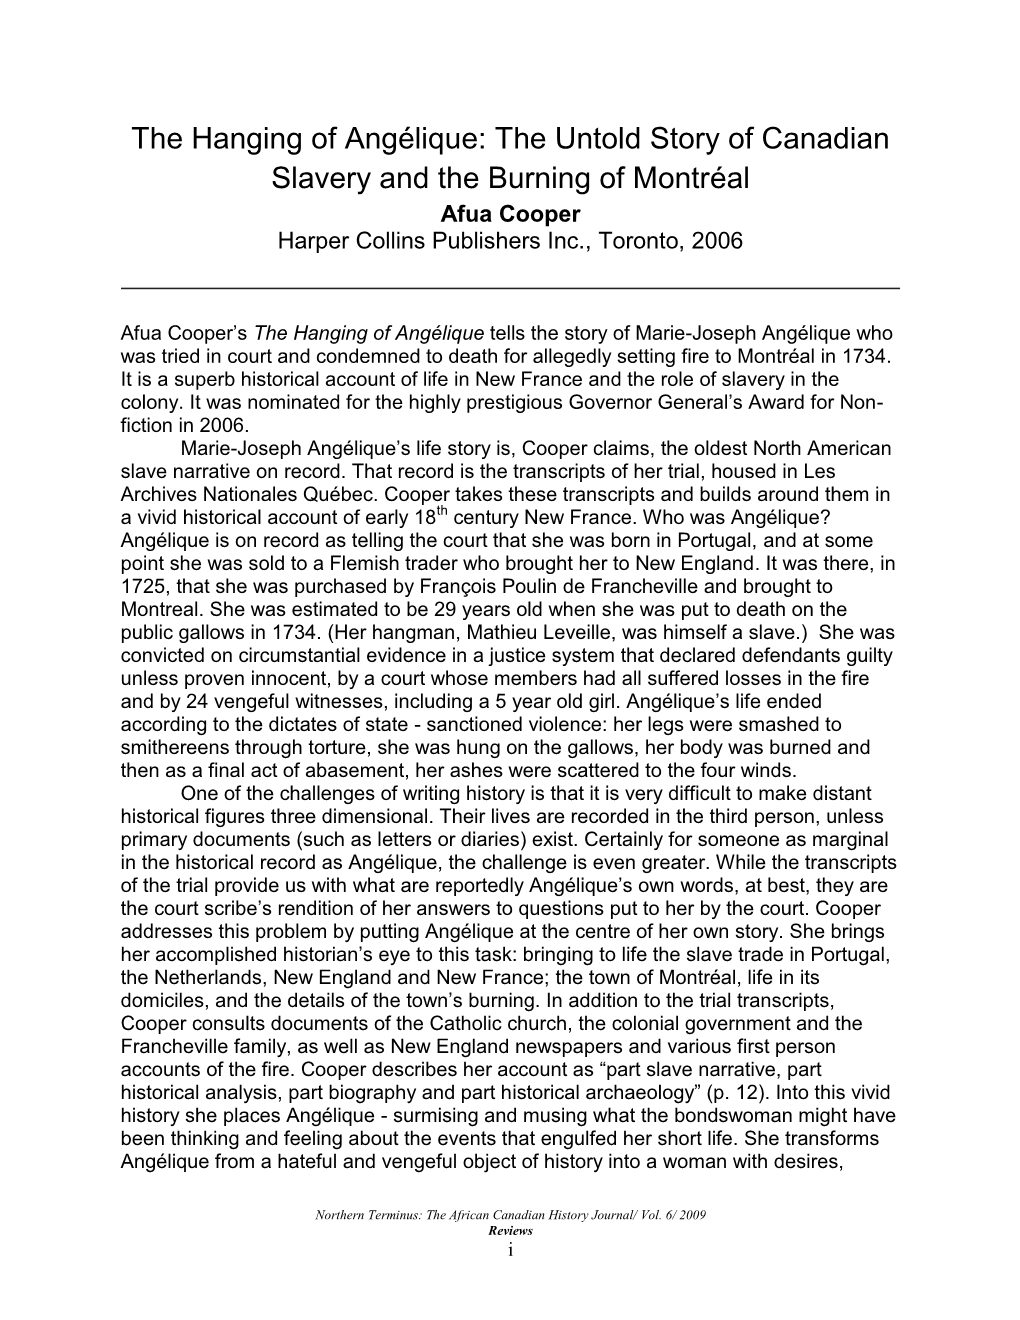 The Hanging of Angélique: the Untold Story of Canadian Slavery and the Burning of Montréal Afua Cooper Harper Collins Publishers Inc., Toronto, 2006